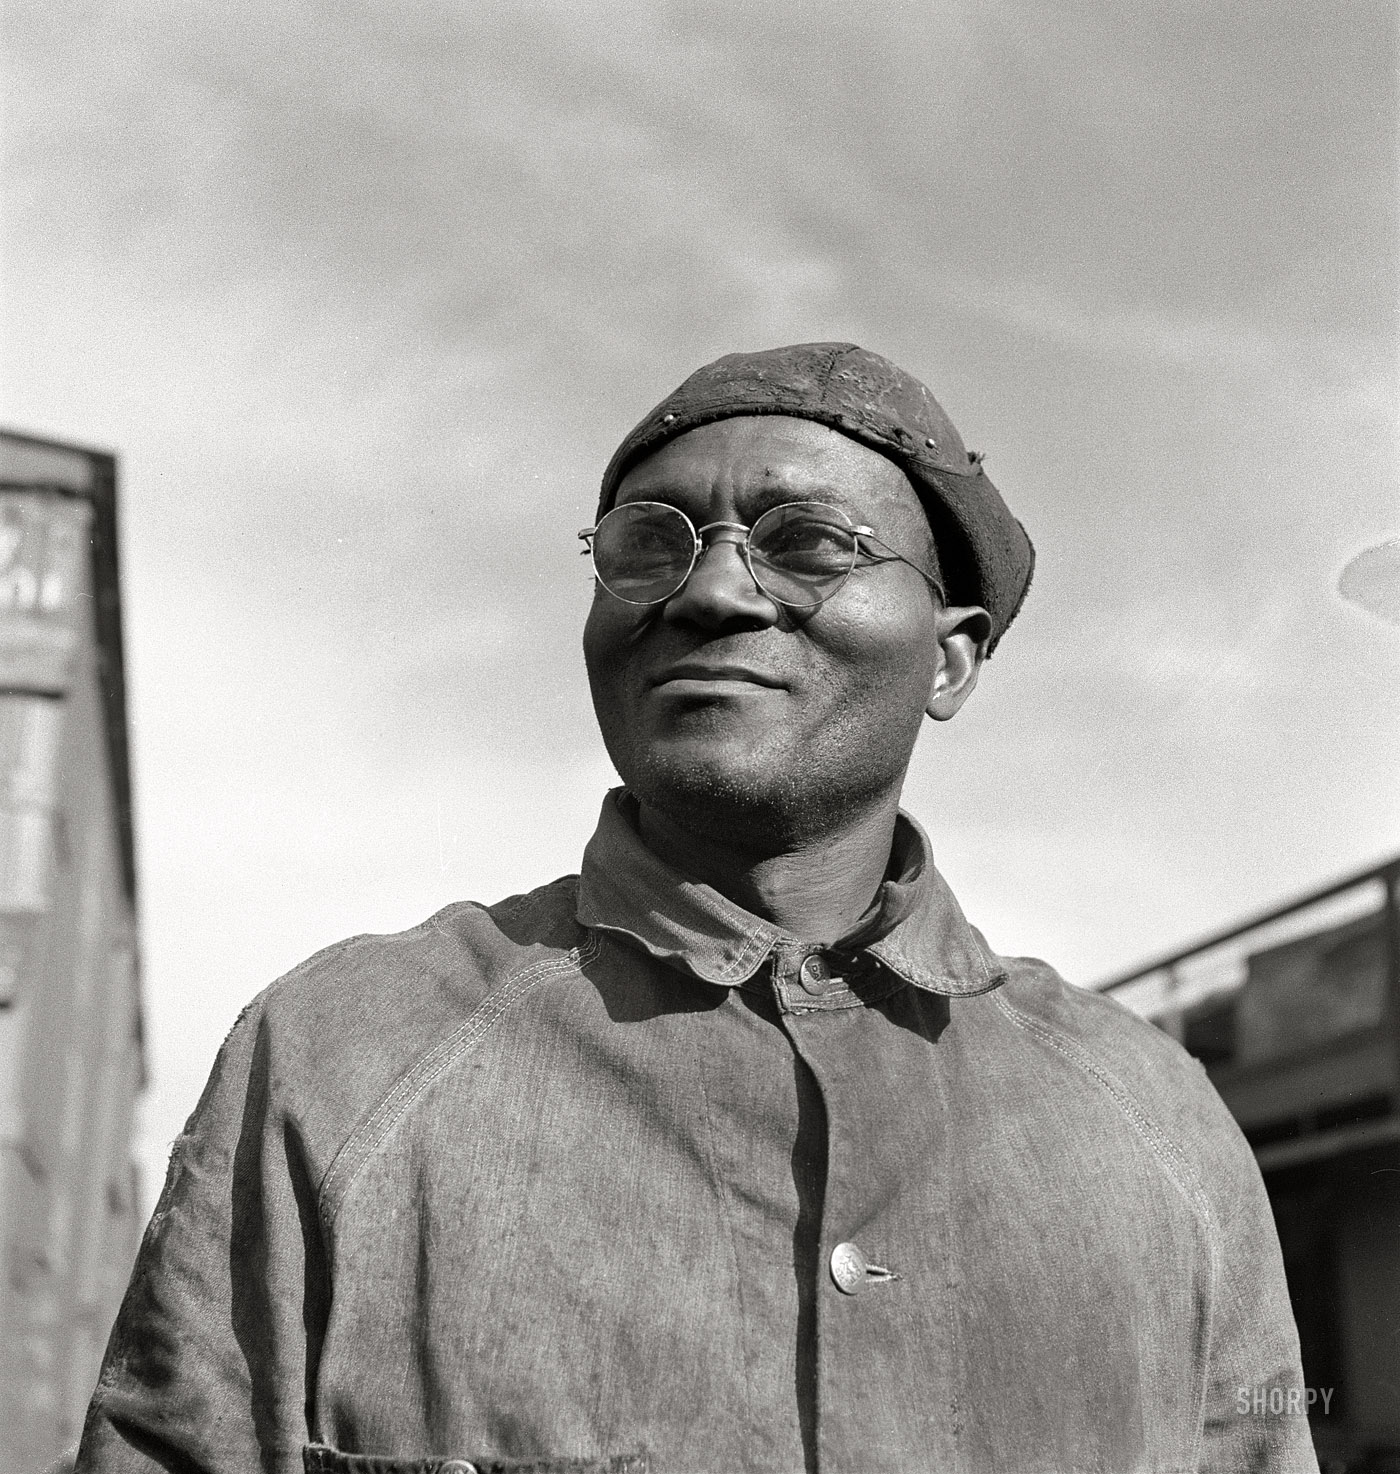 March 1943. "Topeka, Kansas. Robert L. Hill, steel car repairer and rivet driver, at the car shops of the Atchison, Topeka and Santa Fe Railroad." Medium-format nitrate negative by Jack Delano, Office of War Information. View full size.